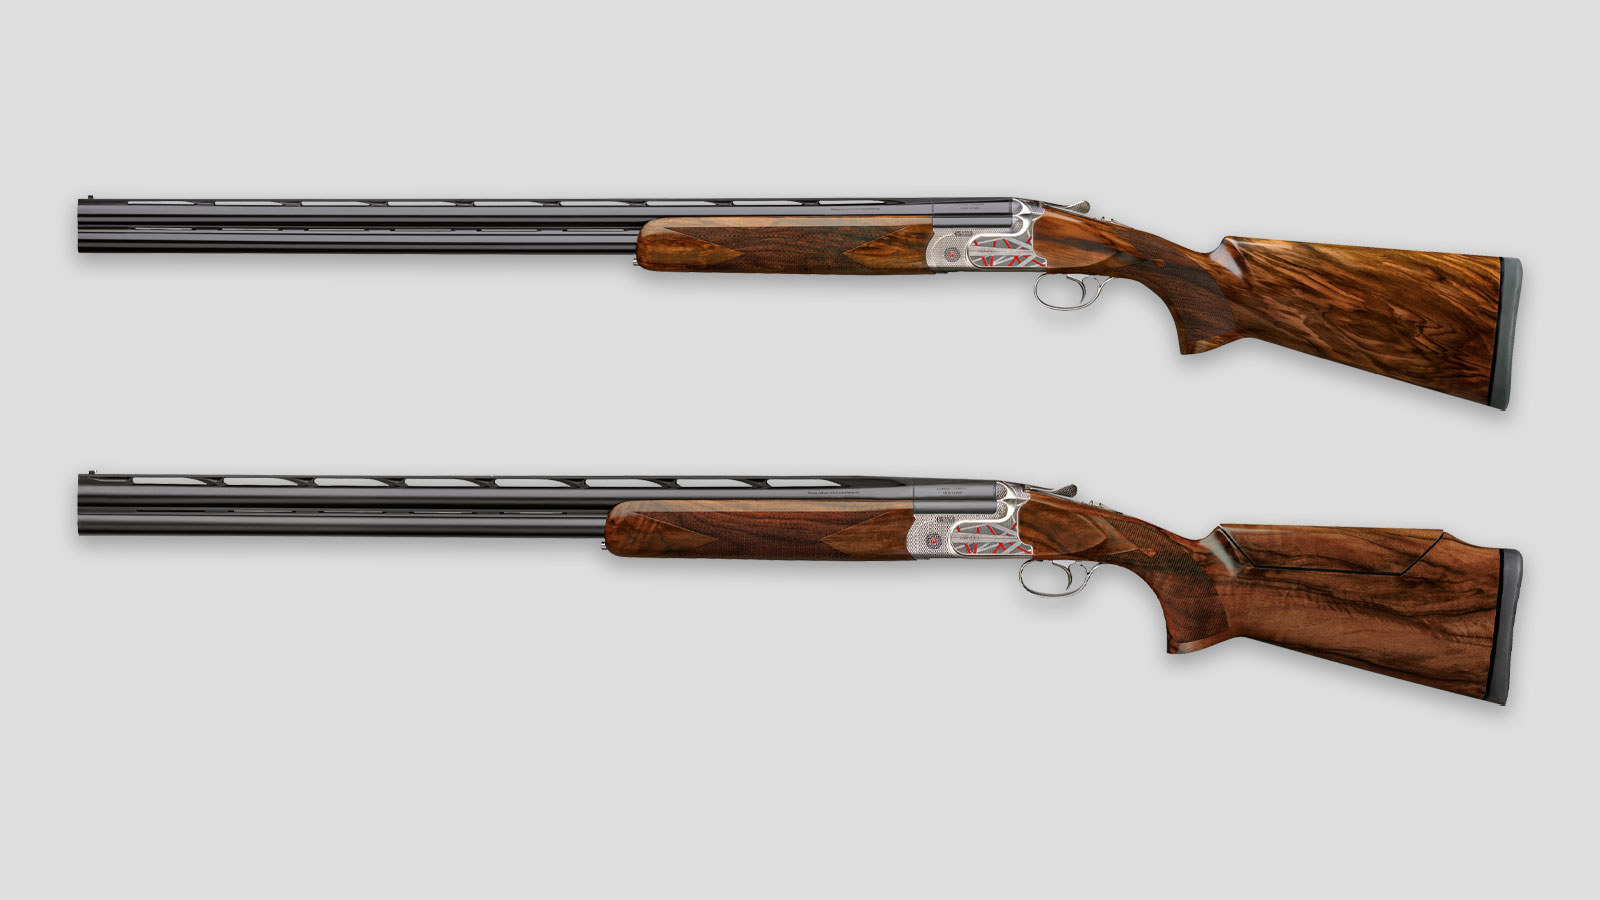 The two different models of the Caesar Guerini Invictus Artco shotgun: the Ascent and the sporting model